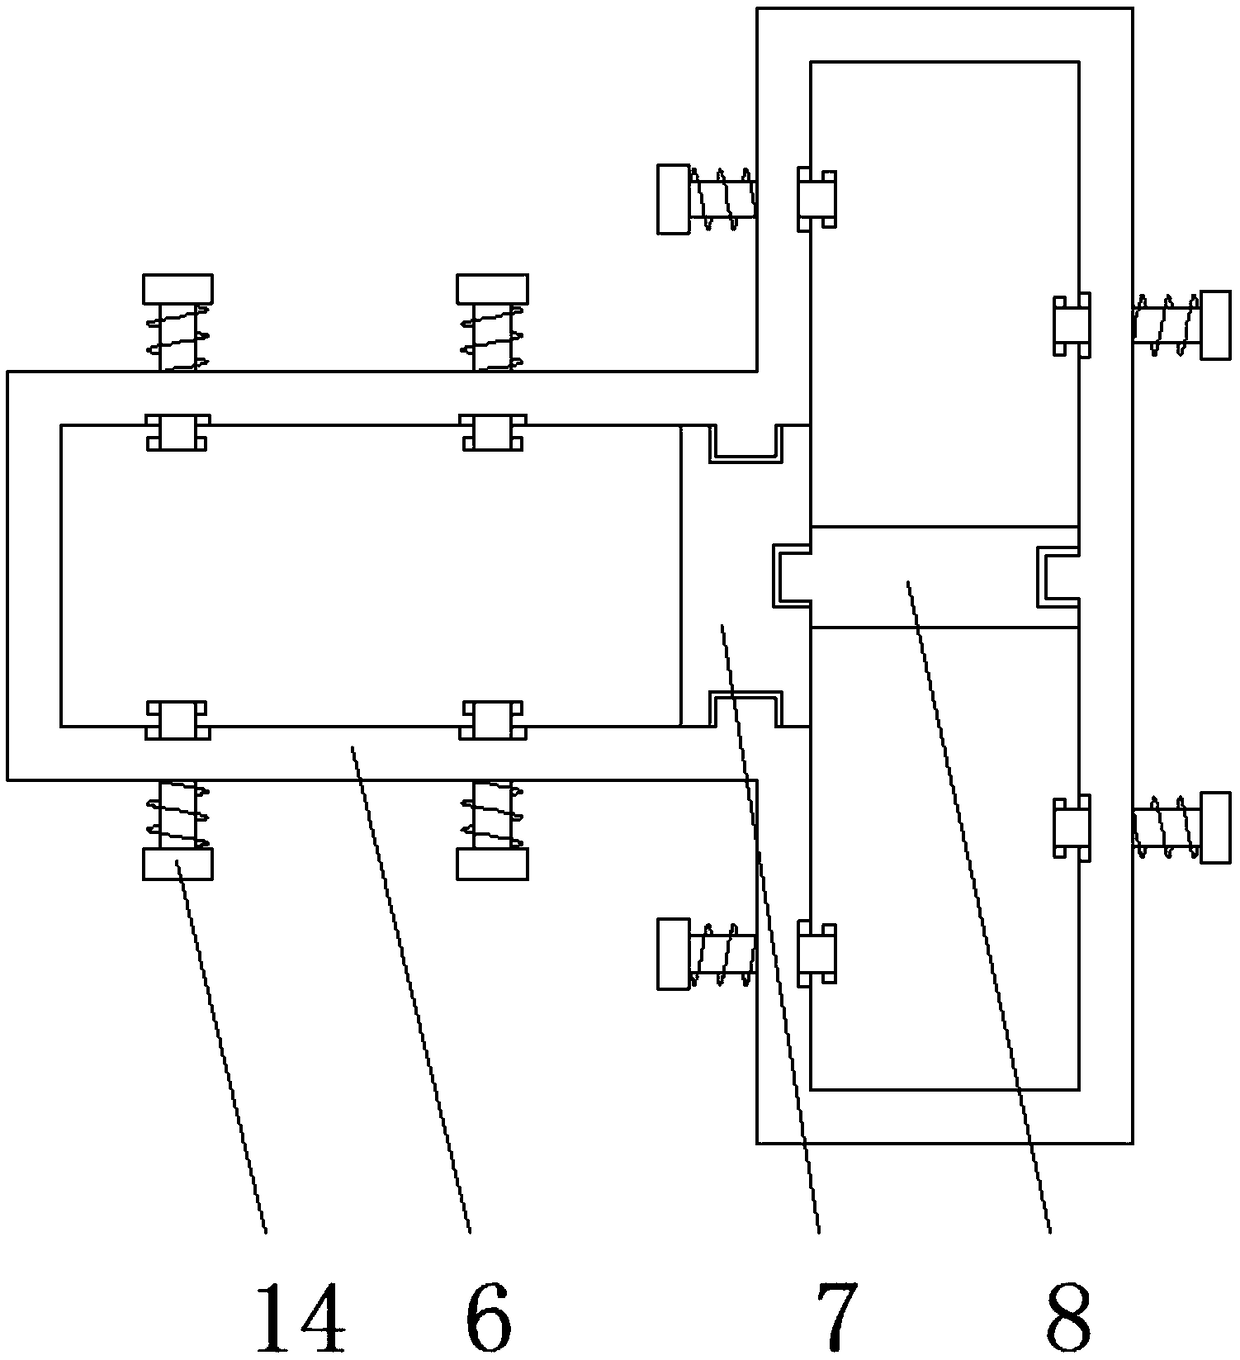 A latch-type battery pack arrangement structure for a new energy vehicle